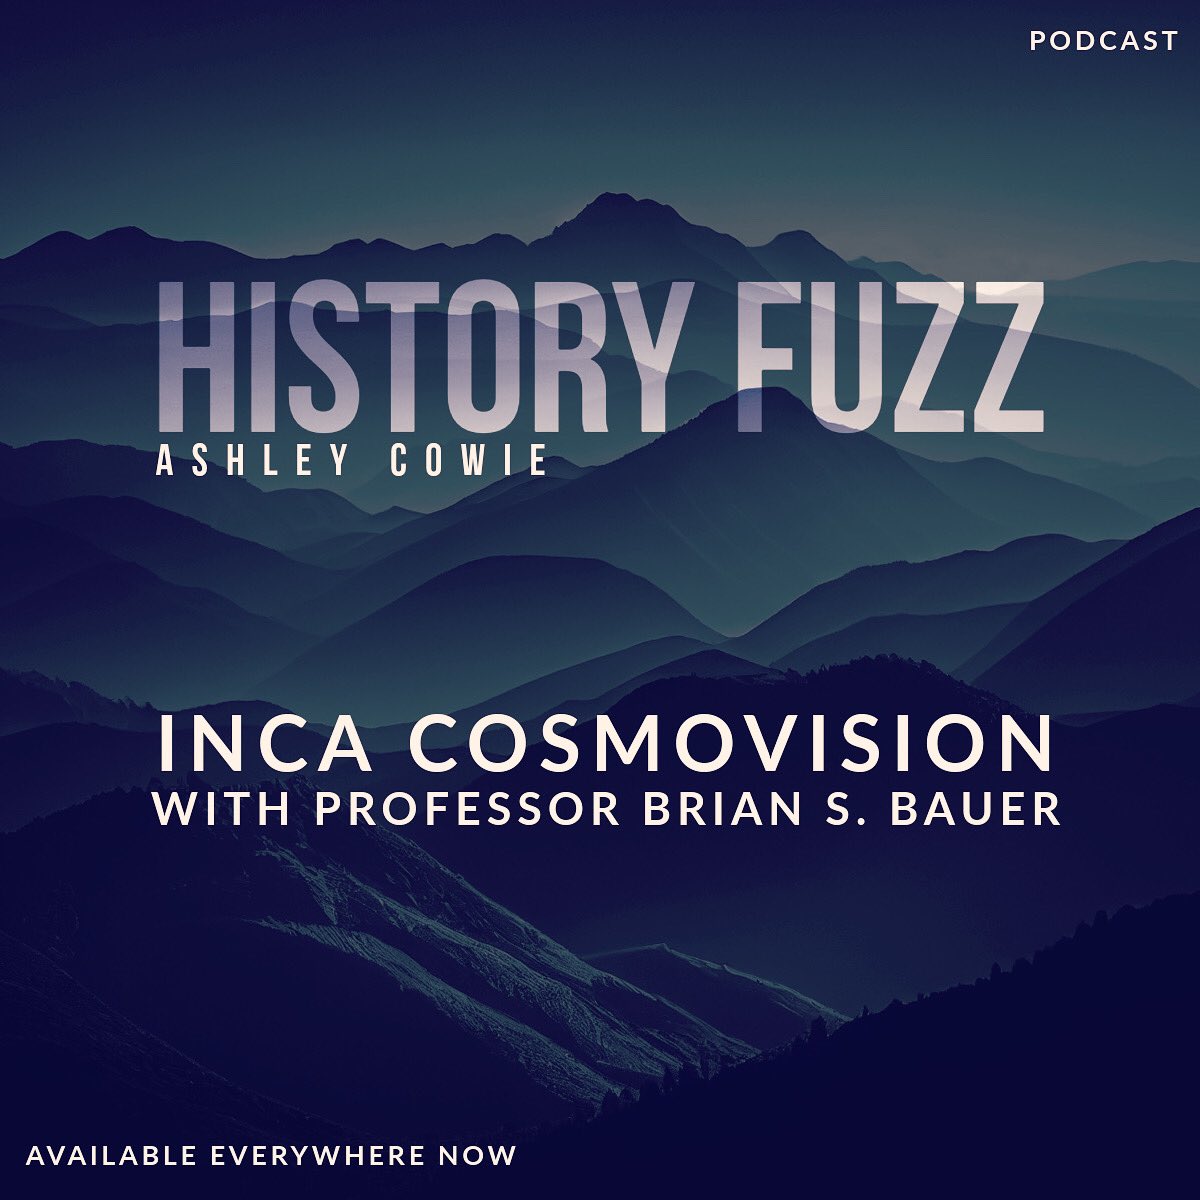 Explore the fineries of ancient Andean cosmovision with Professor Brian S. Bauer from the University of Chicago, Illinois.
.
.
.
#cosmovision #inca #astronomy #archaeoastronomy #islandofthesun #bolivia🇧🇴 #peru🇵🇪 #brianbauer #universityofillinois #historyfuzz #historyfuzzpodcast